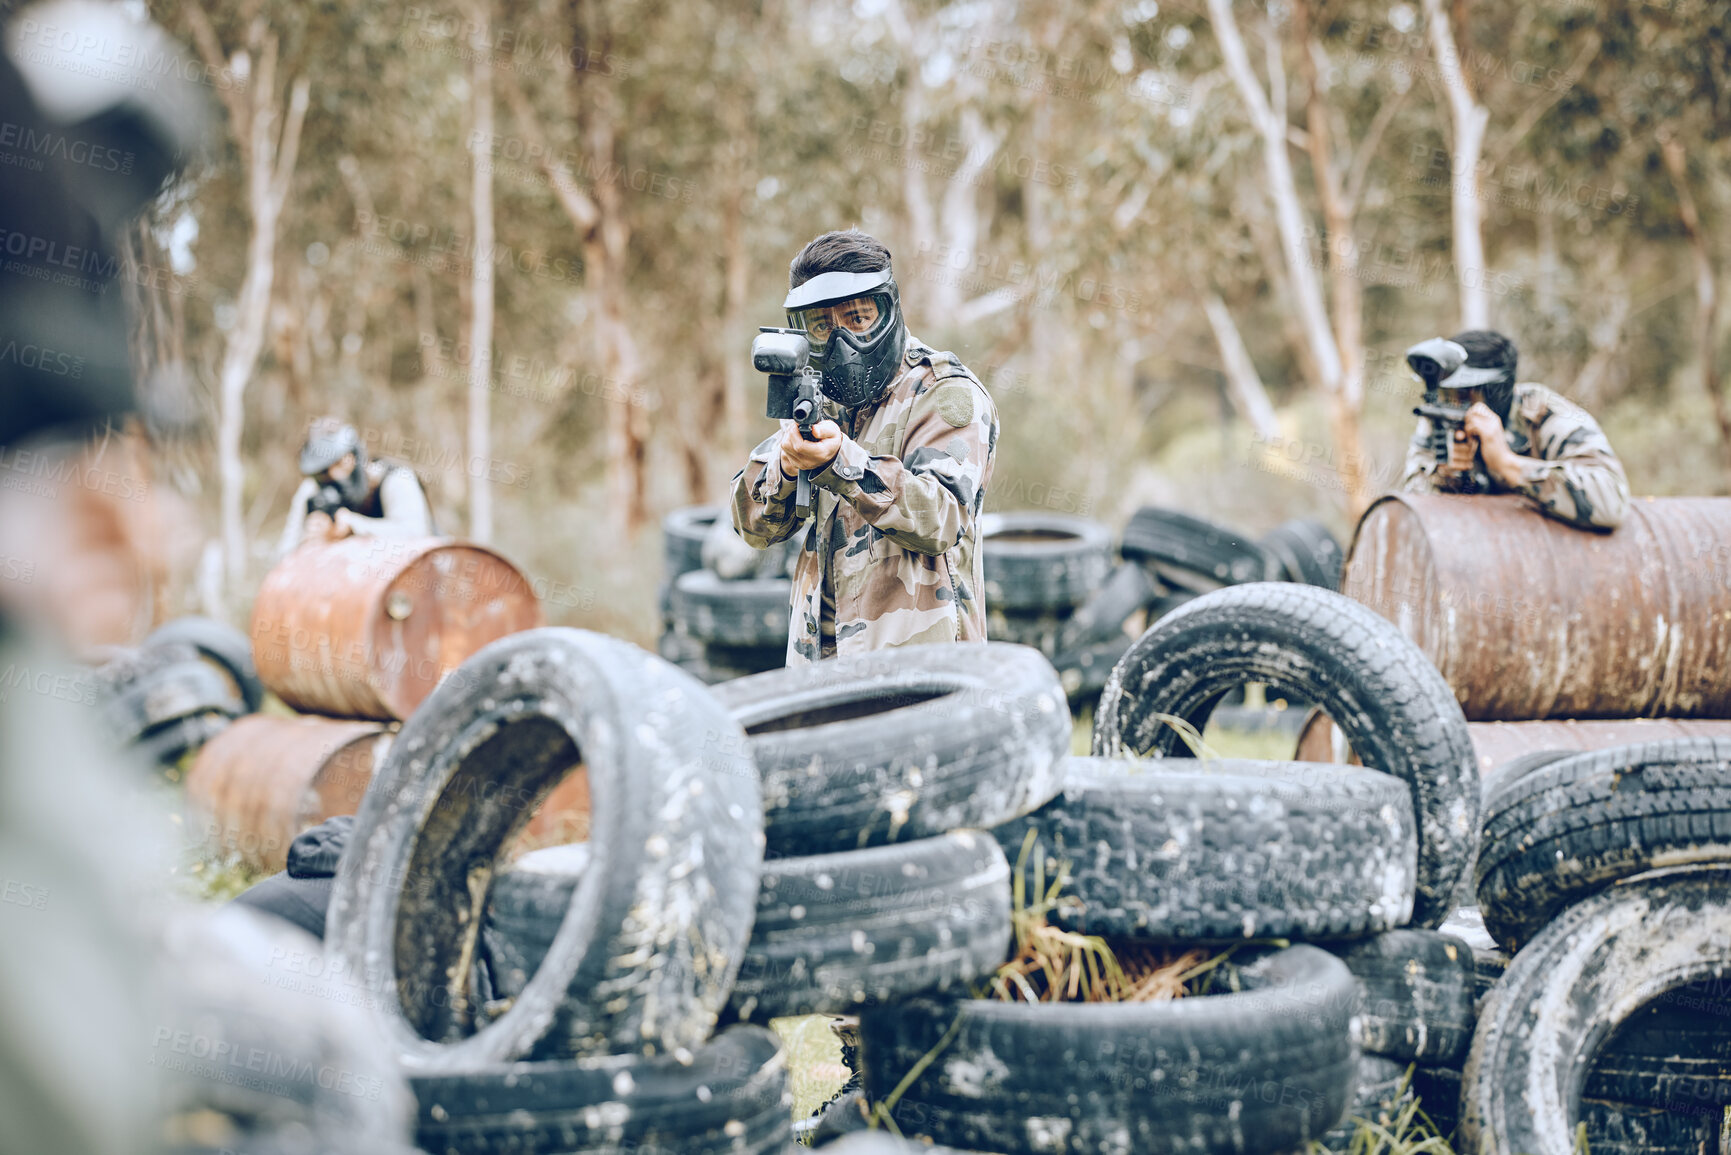 Buy stock photo Paintball, war or gun men in a shooting game playing or training with action on a fun battlefield. Mission focused, military or army team with weapons gear for survival in an outdoor competition